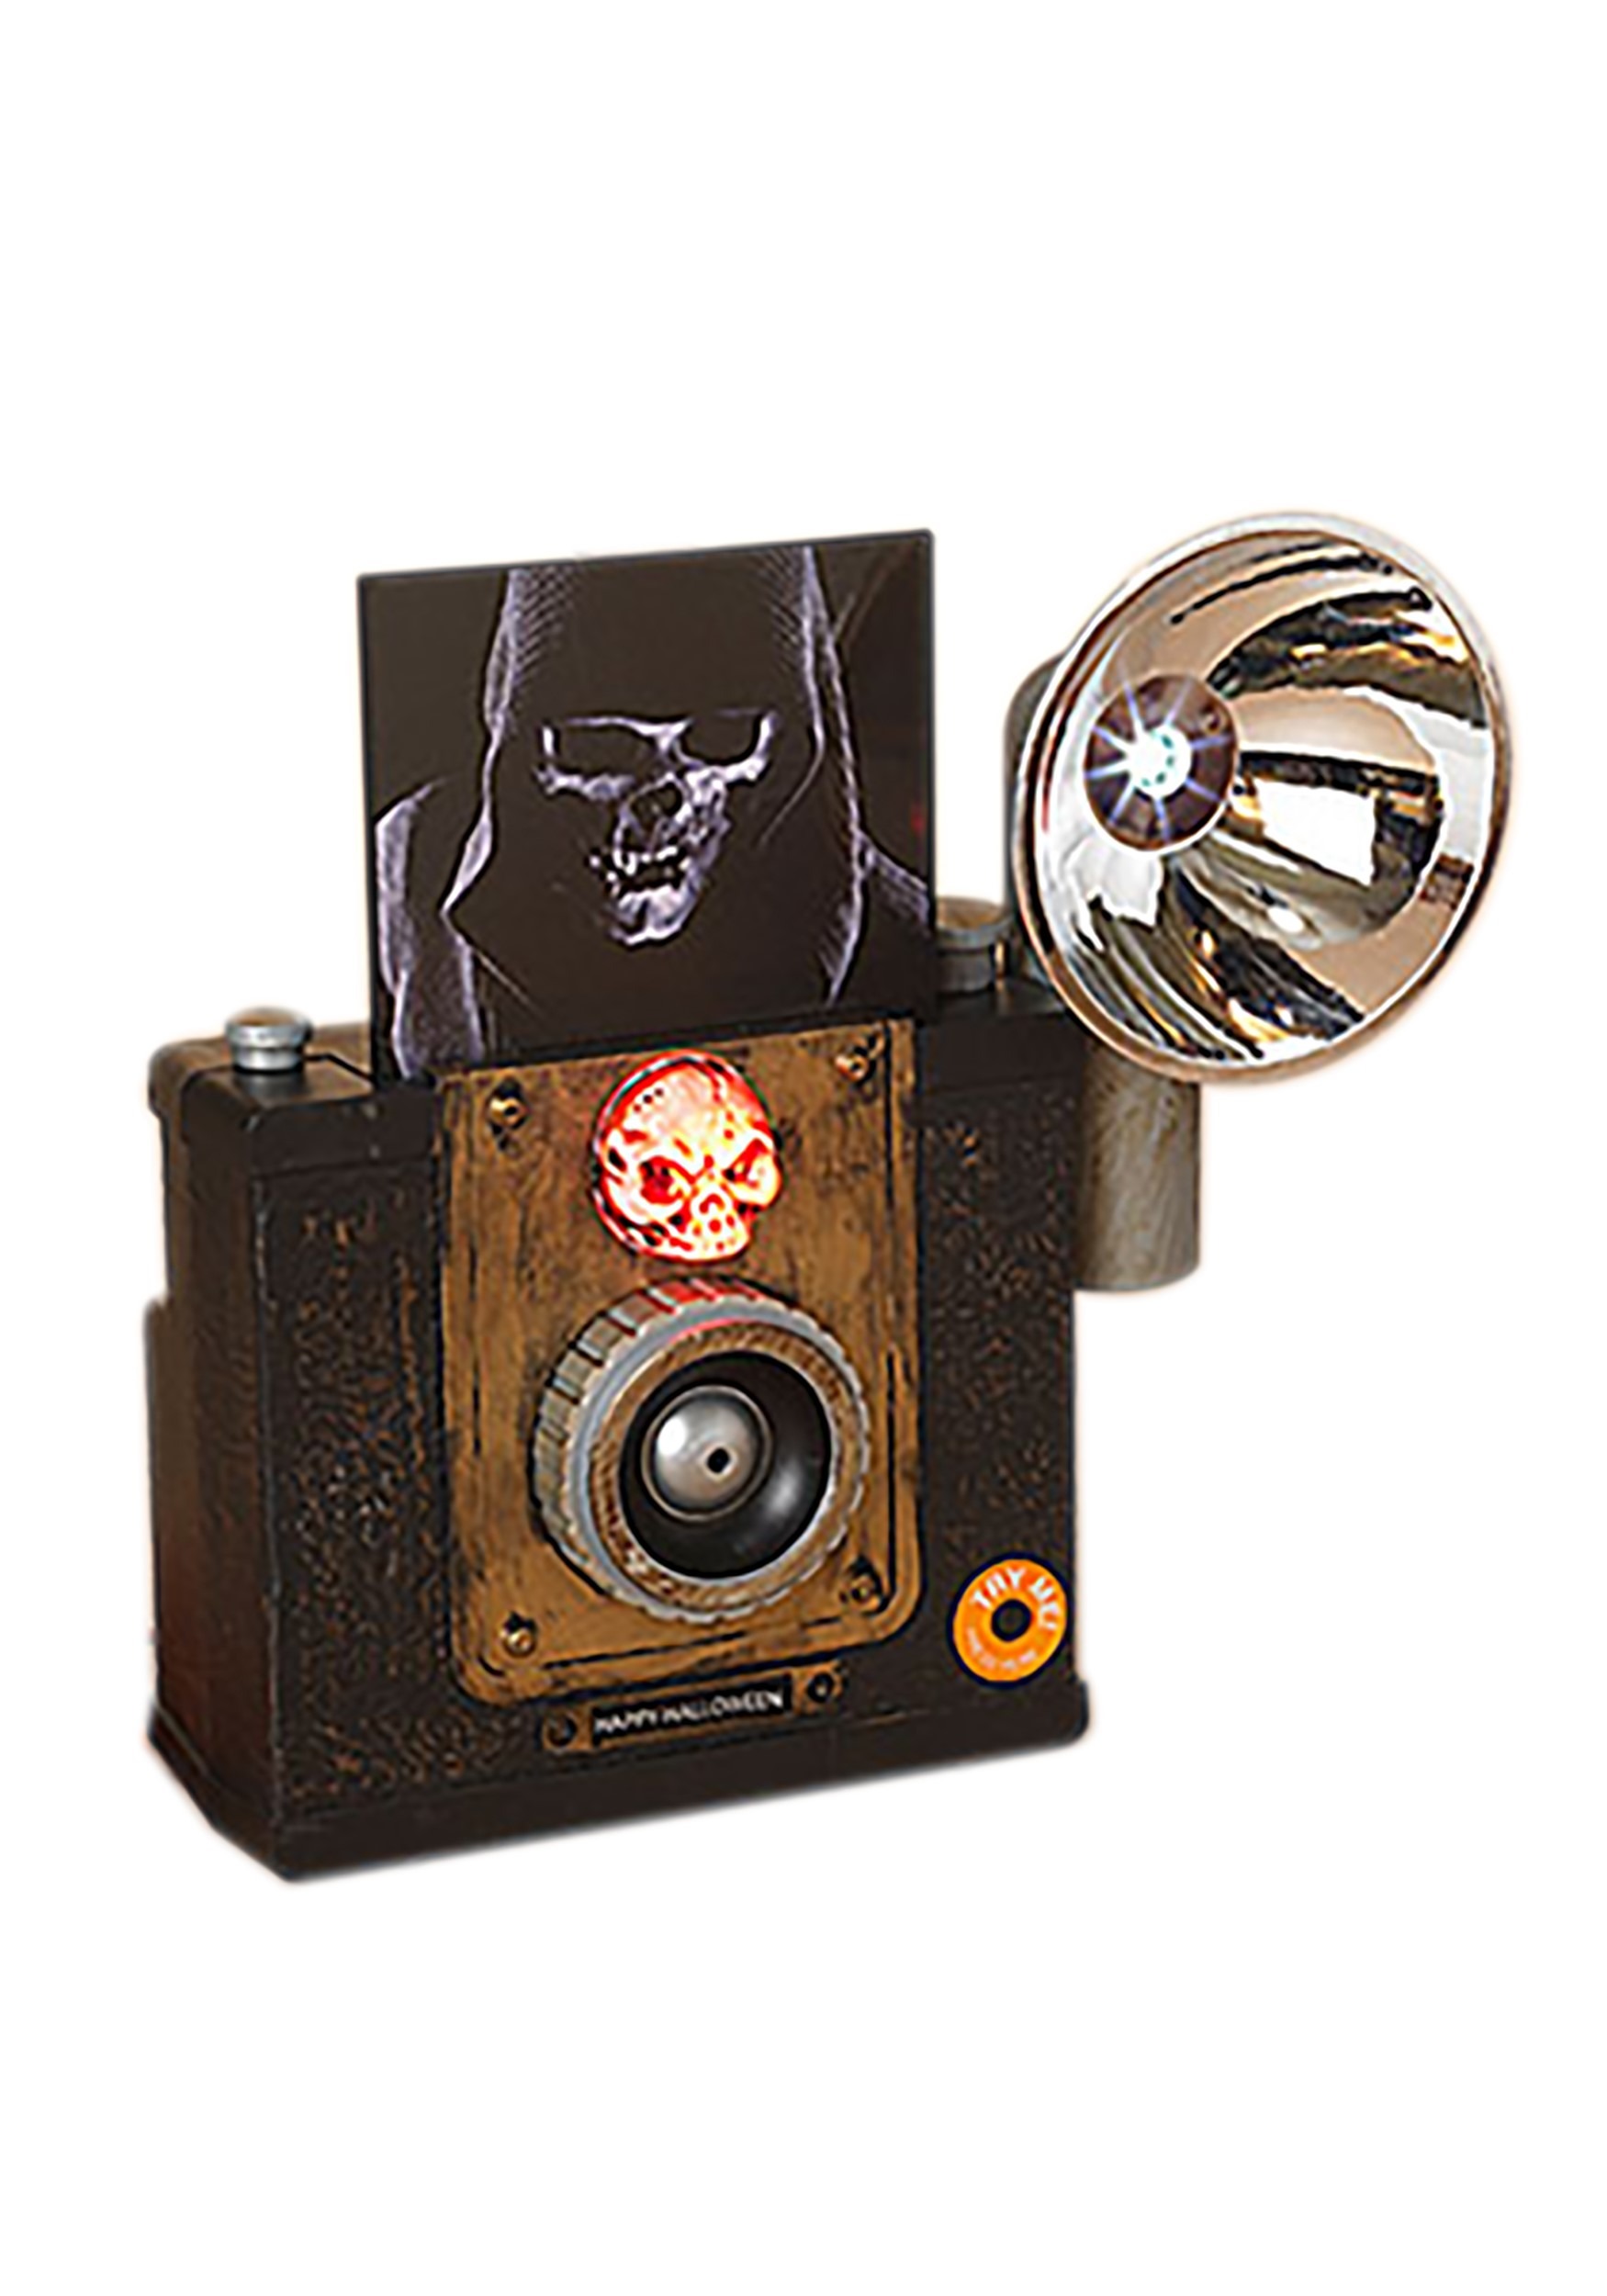 9.5" Animated Light Up Camera with Sound Prop | Scary Decorations